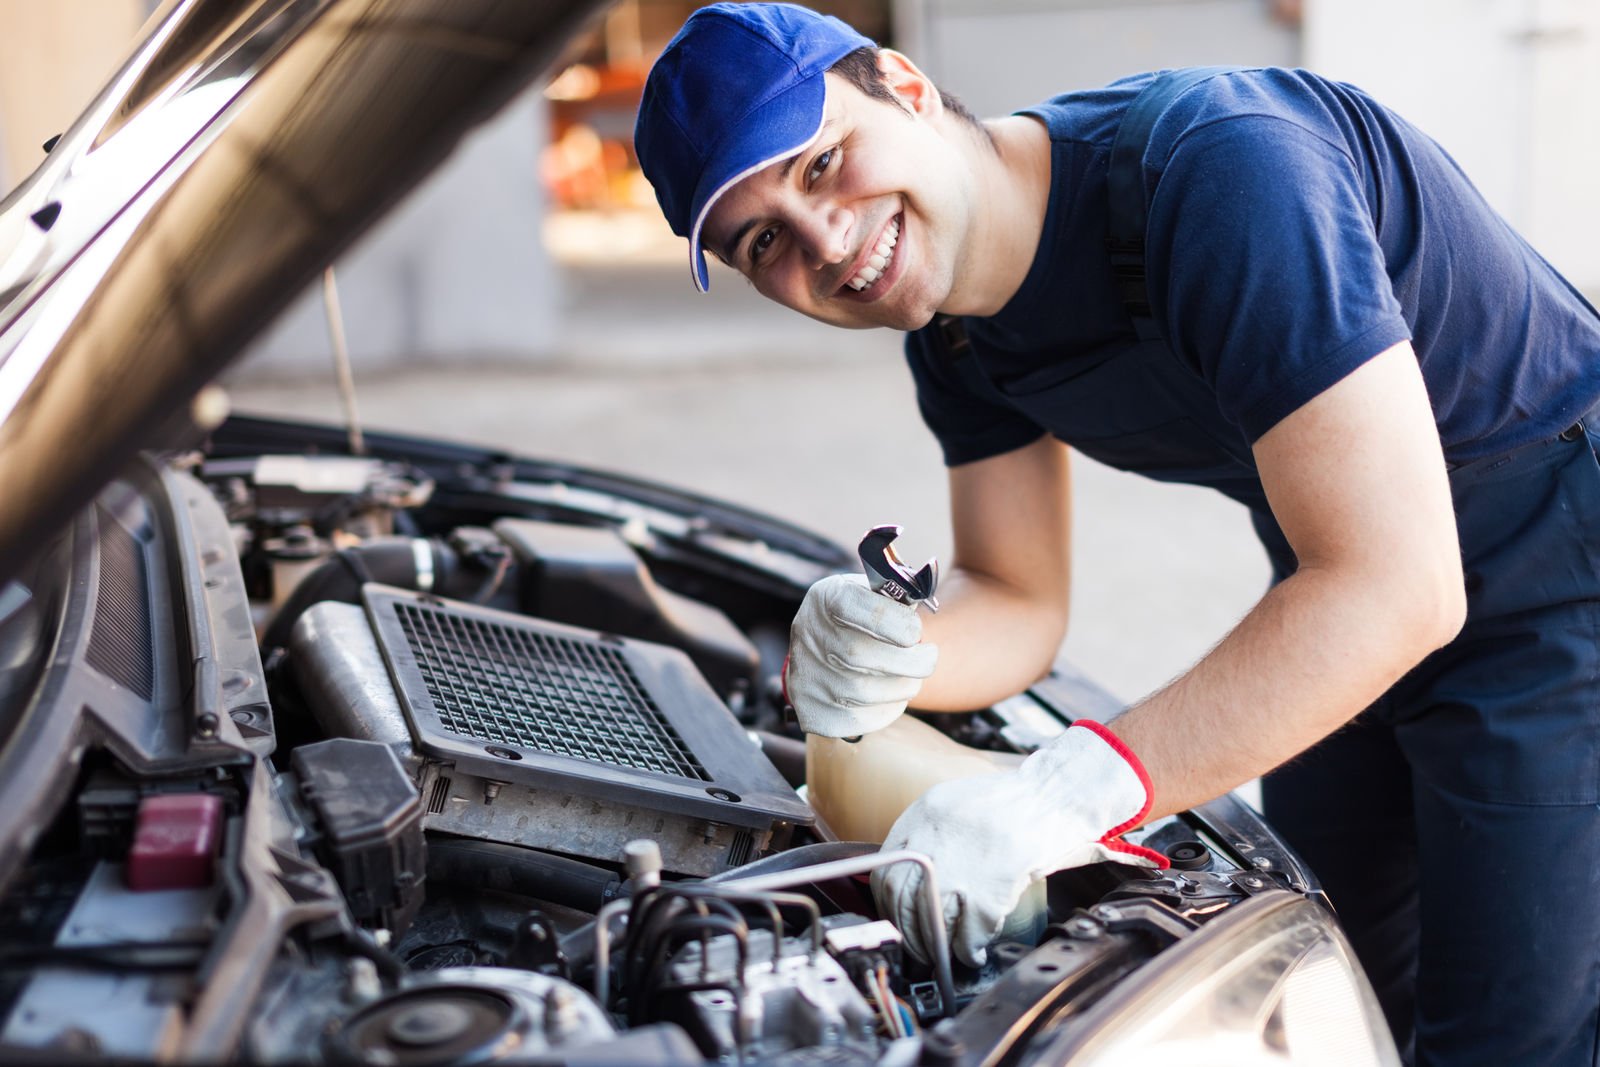 Can my car insurance company make me use a specific car repair shop?